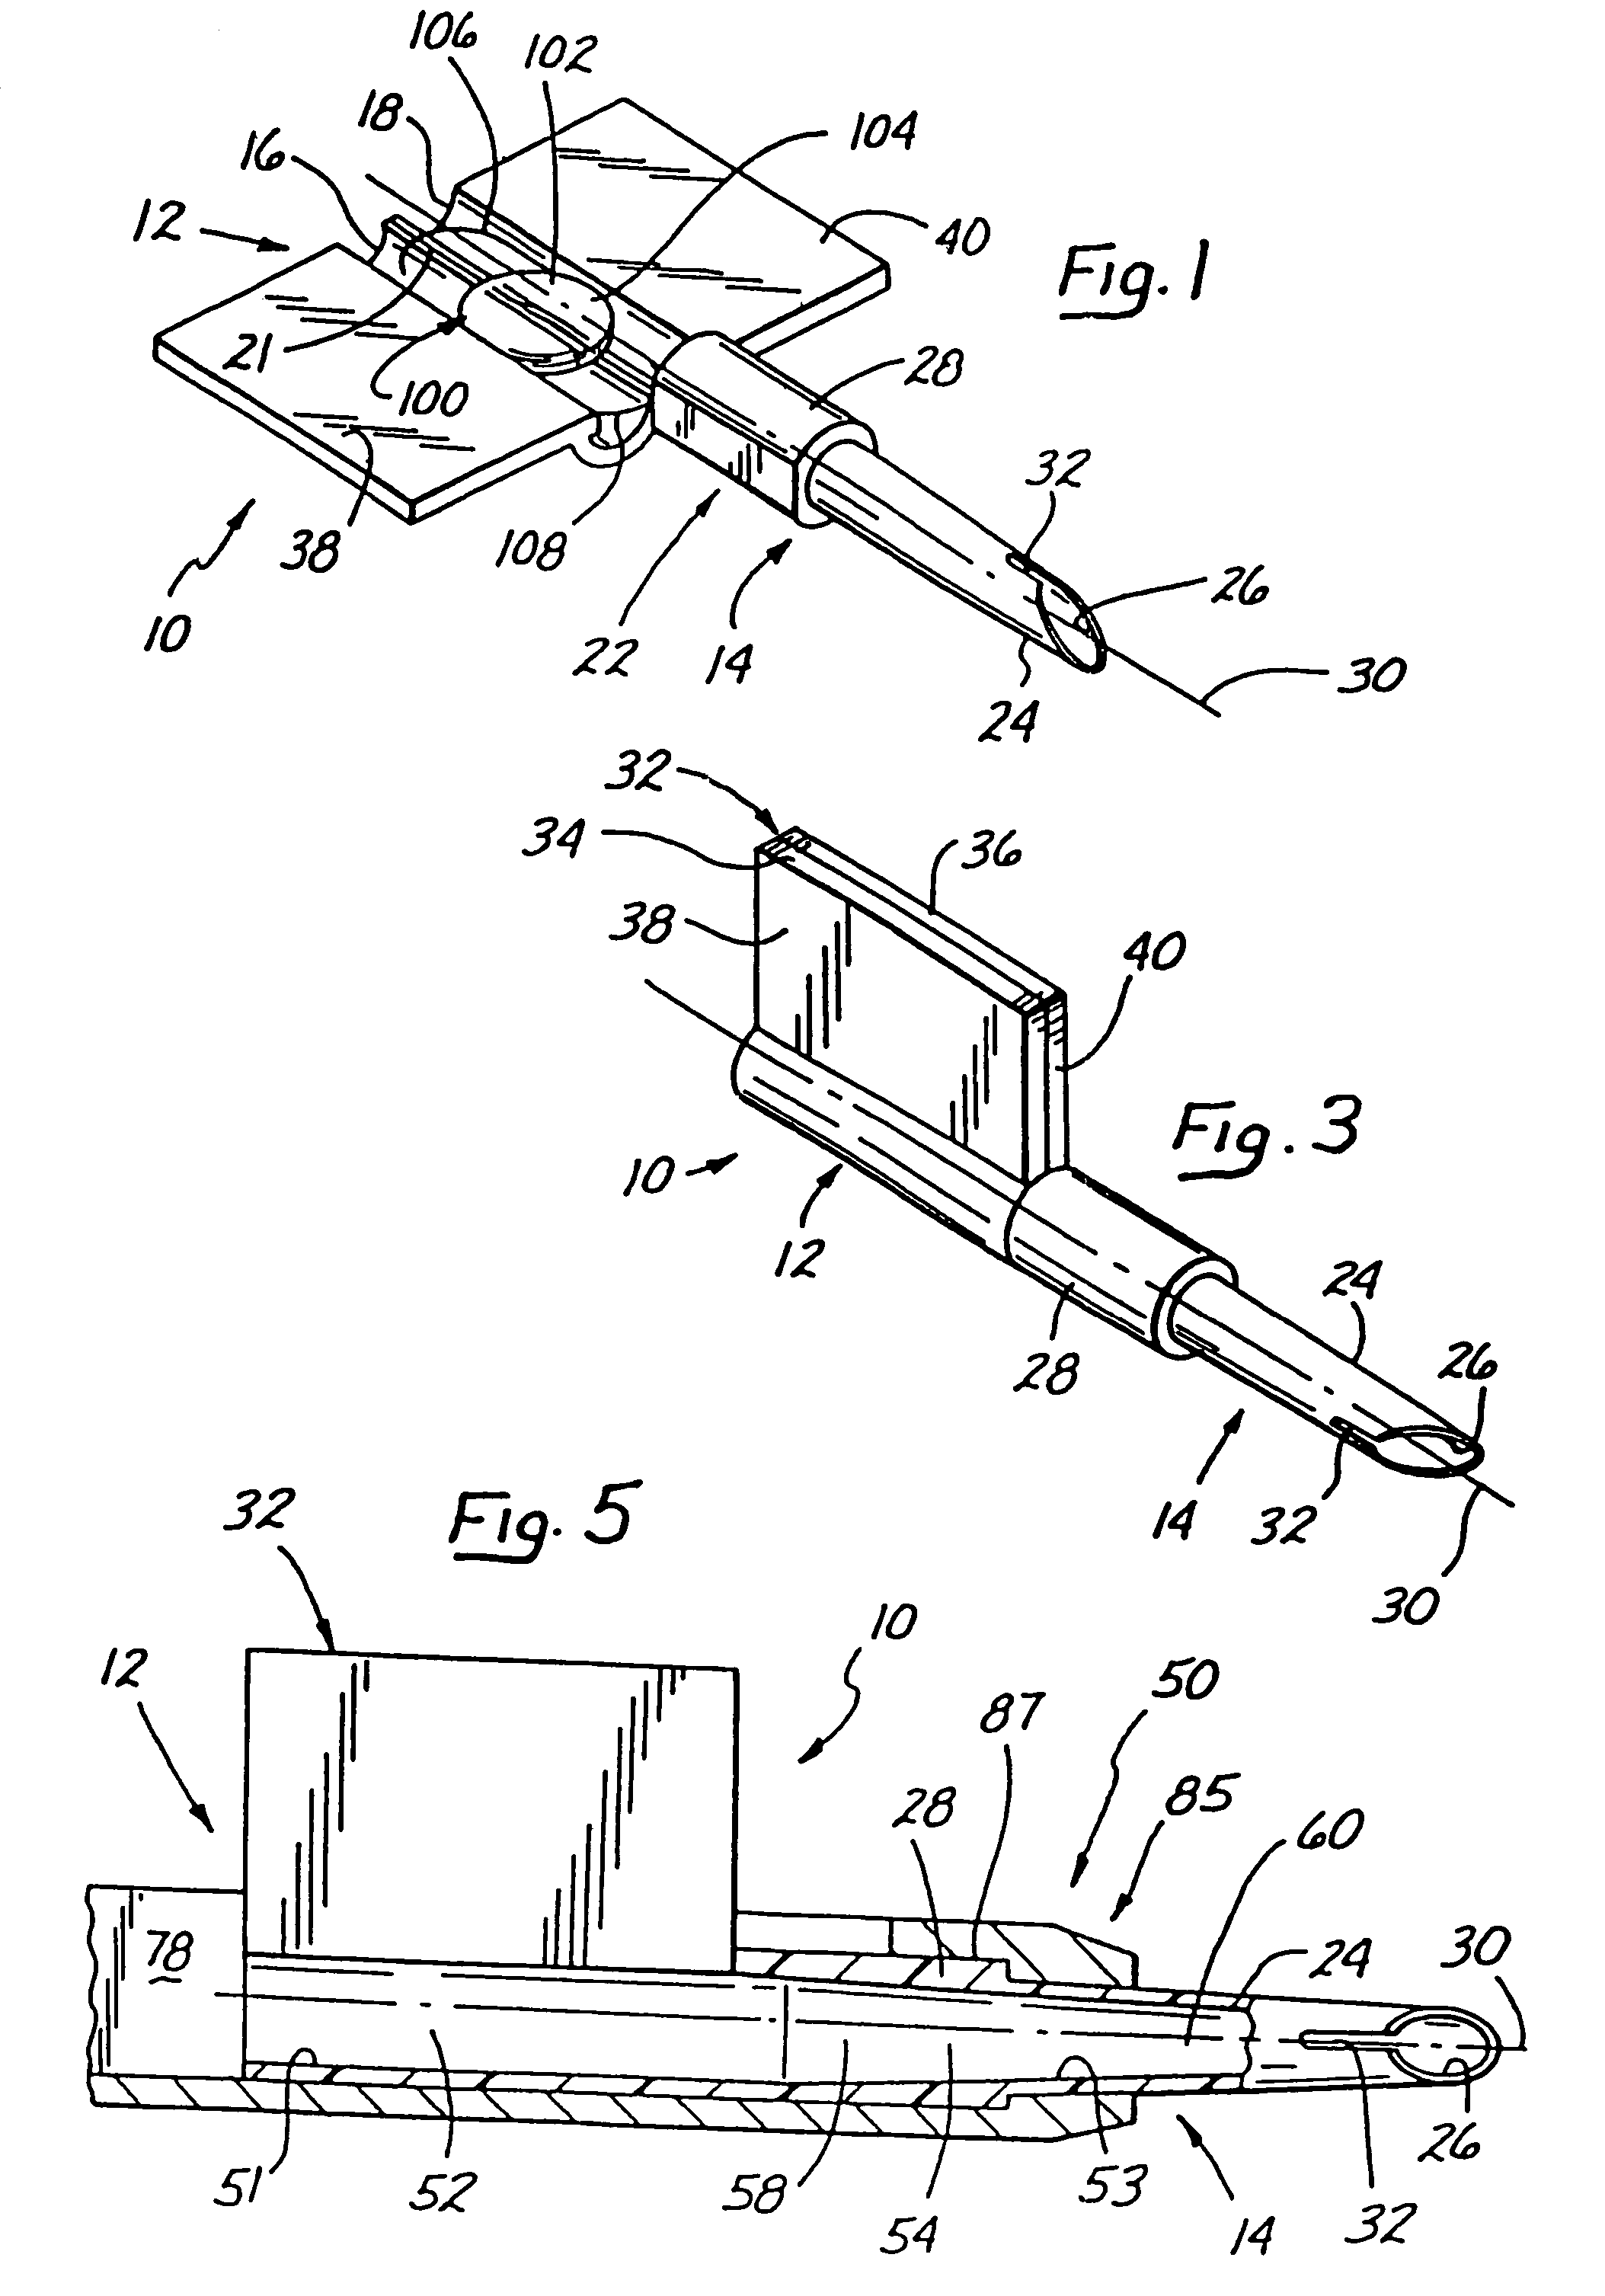 IOL insertion apparatus and method for making and using same